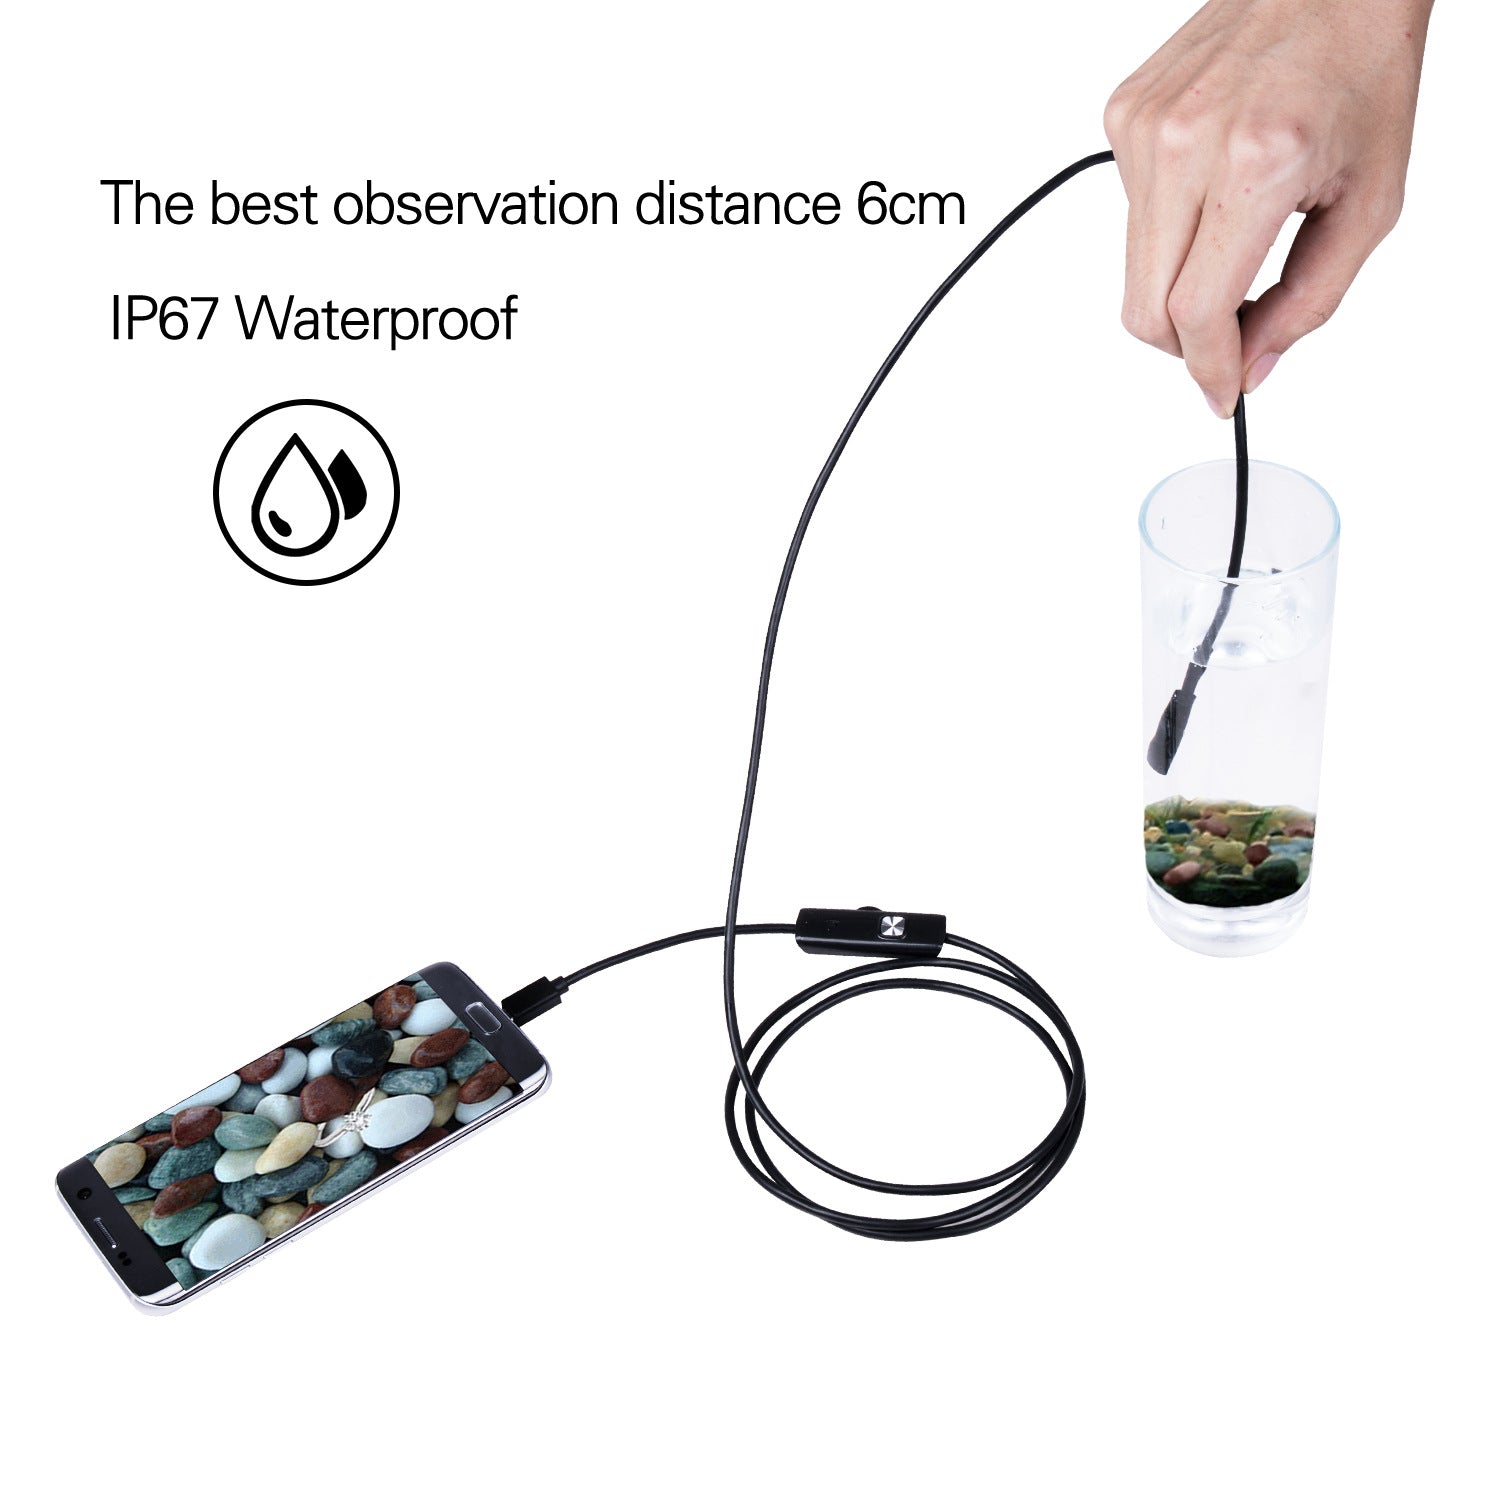 1m USB Inspection Camera Borescope Scope Camera with 5.5mm / 6 LED Lights for Android Windows IP67 Waterproof Smart Phone Endoscope